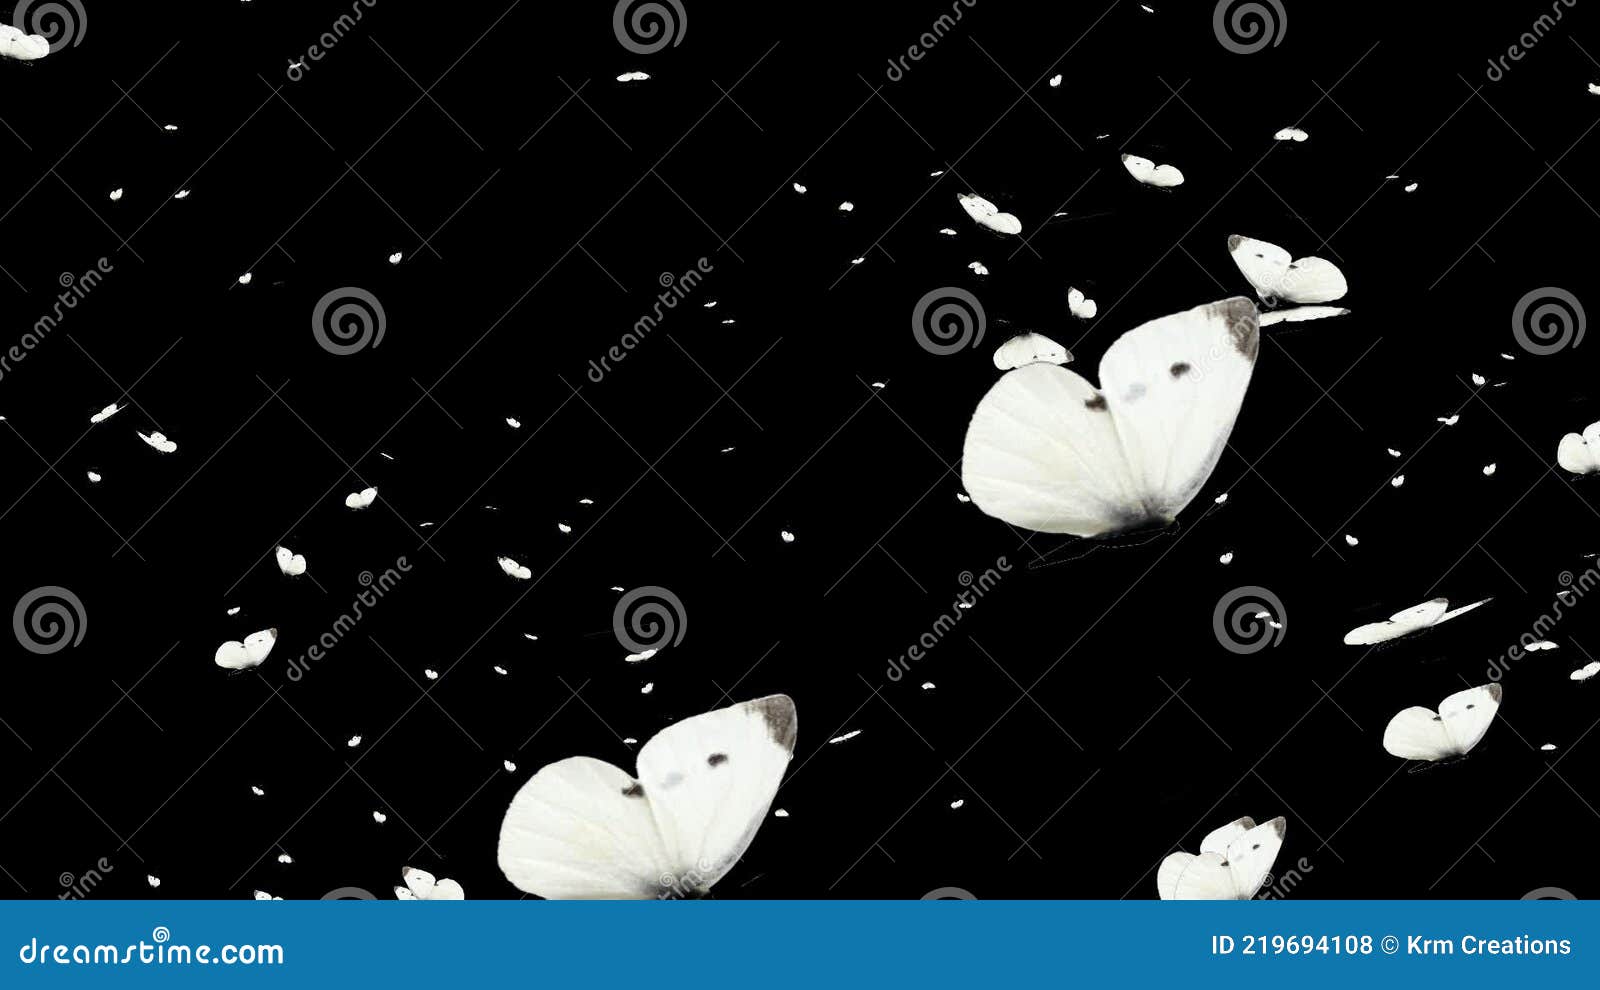 White Color Butterflies Flight Transparent Background Videos 02 Stock  Footage - Video of fishes, transparent: 219694108